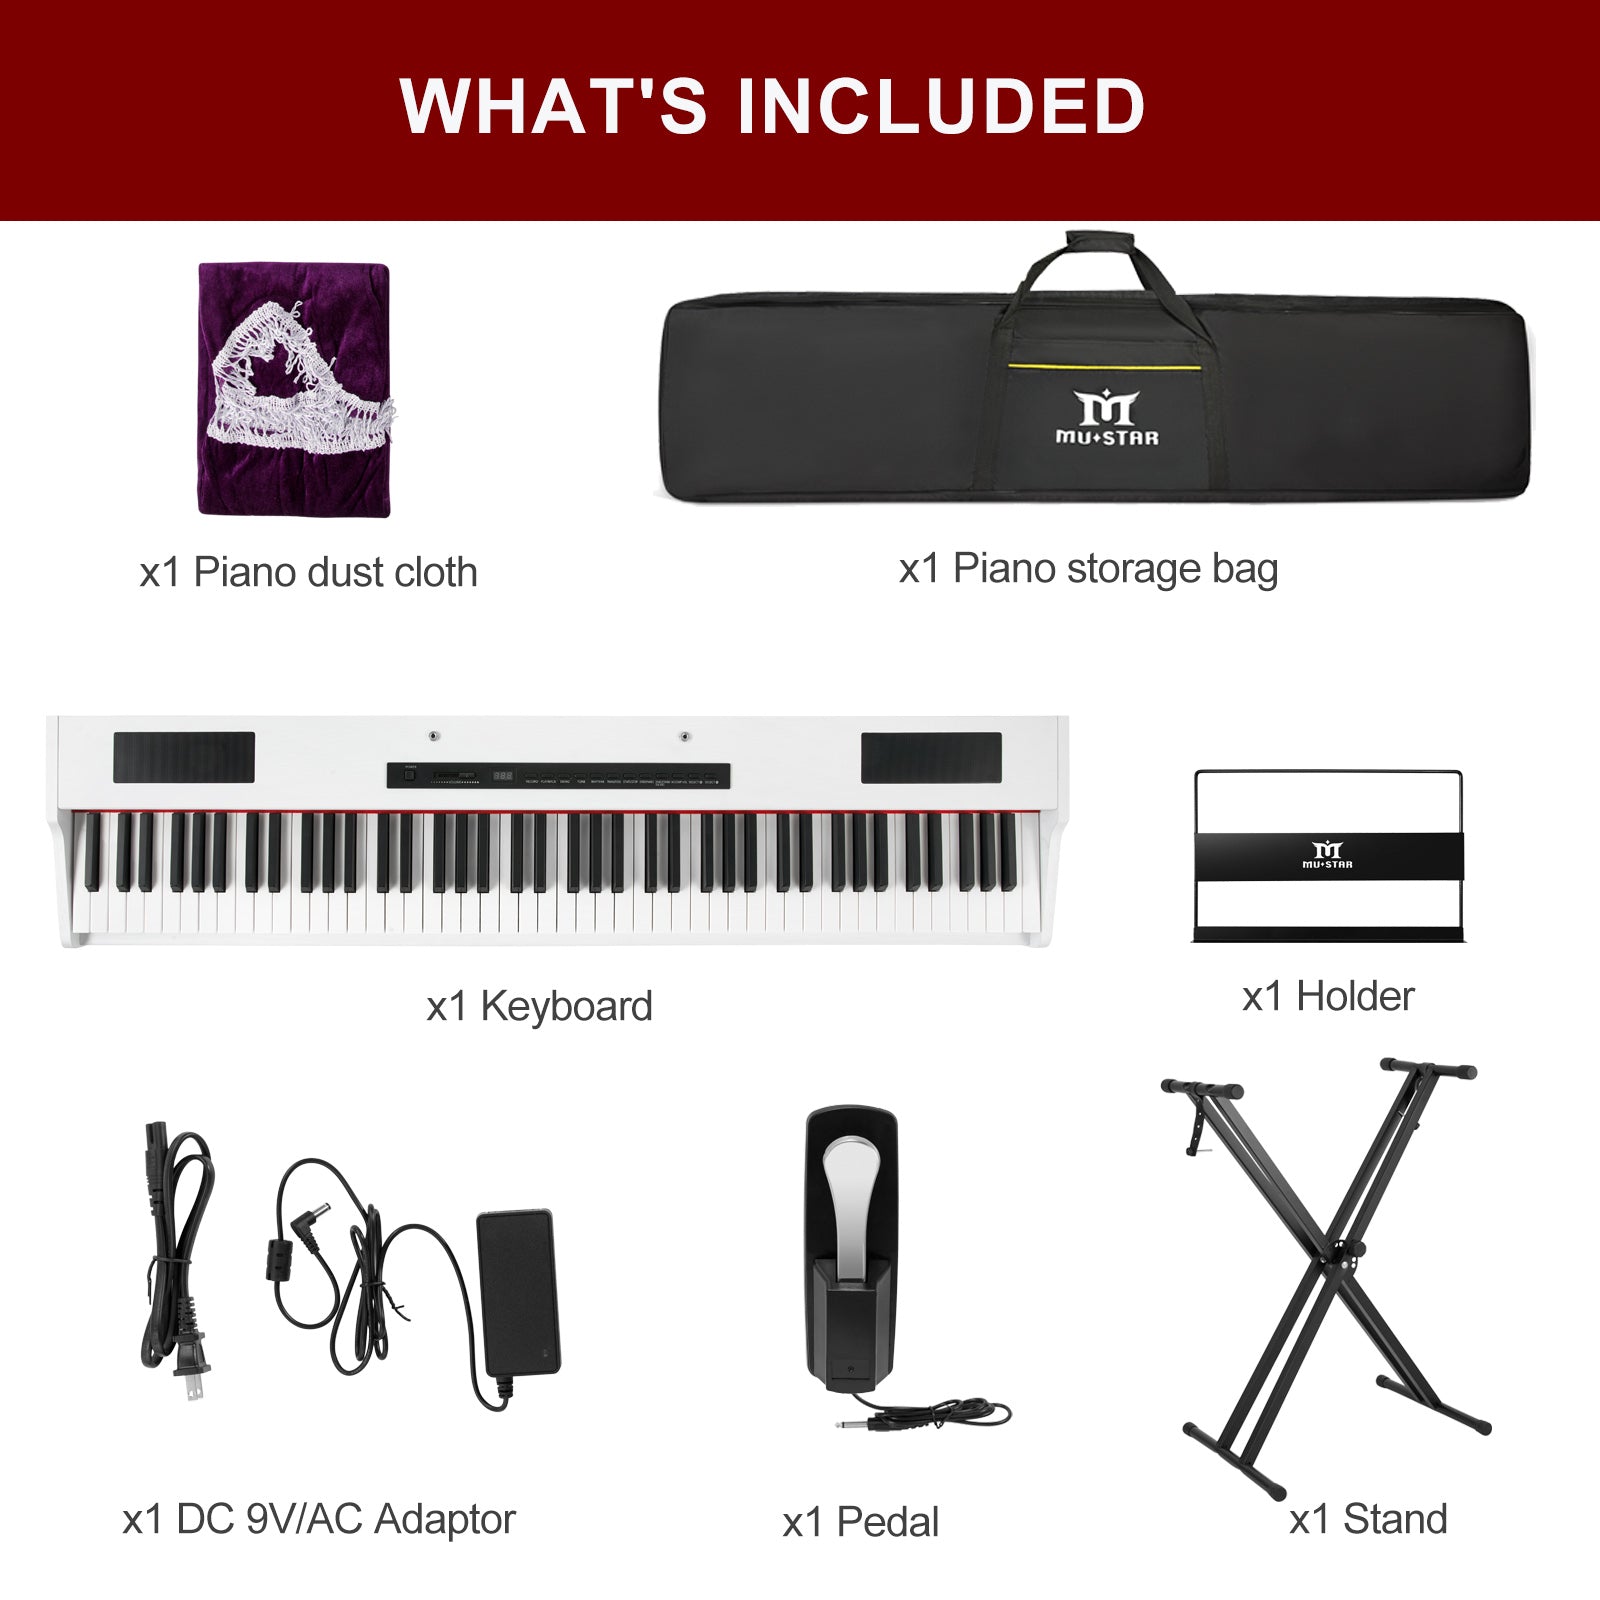 MUSTAR MDP-1300, 88 Key Weighted Digital Piano Wooden Electronic Keyboards, Hammer Action，Bluetooth Connection, MIDI, Sustain Pedal, 80 demo 600 rhythms 800 tones，2×20W stereo speakers, White